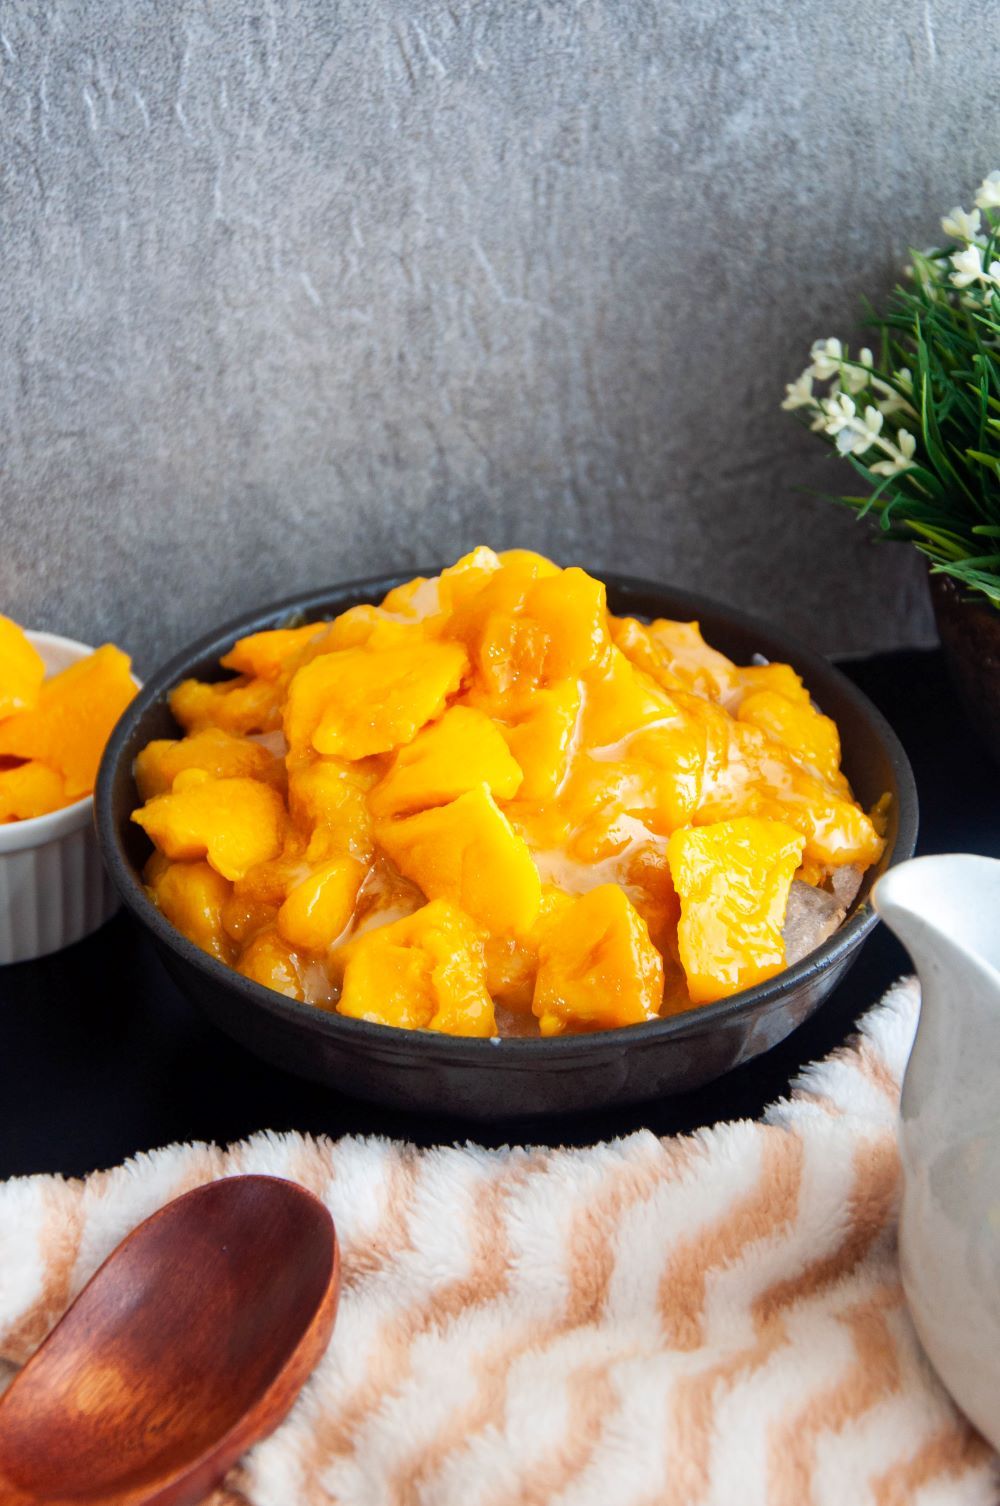 Topping the crushed ice with the mango compote and the cubed mangoes